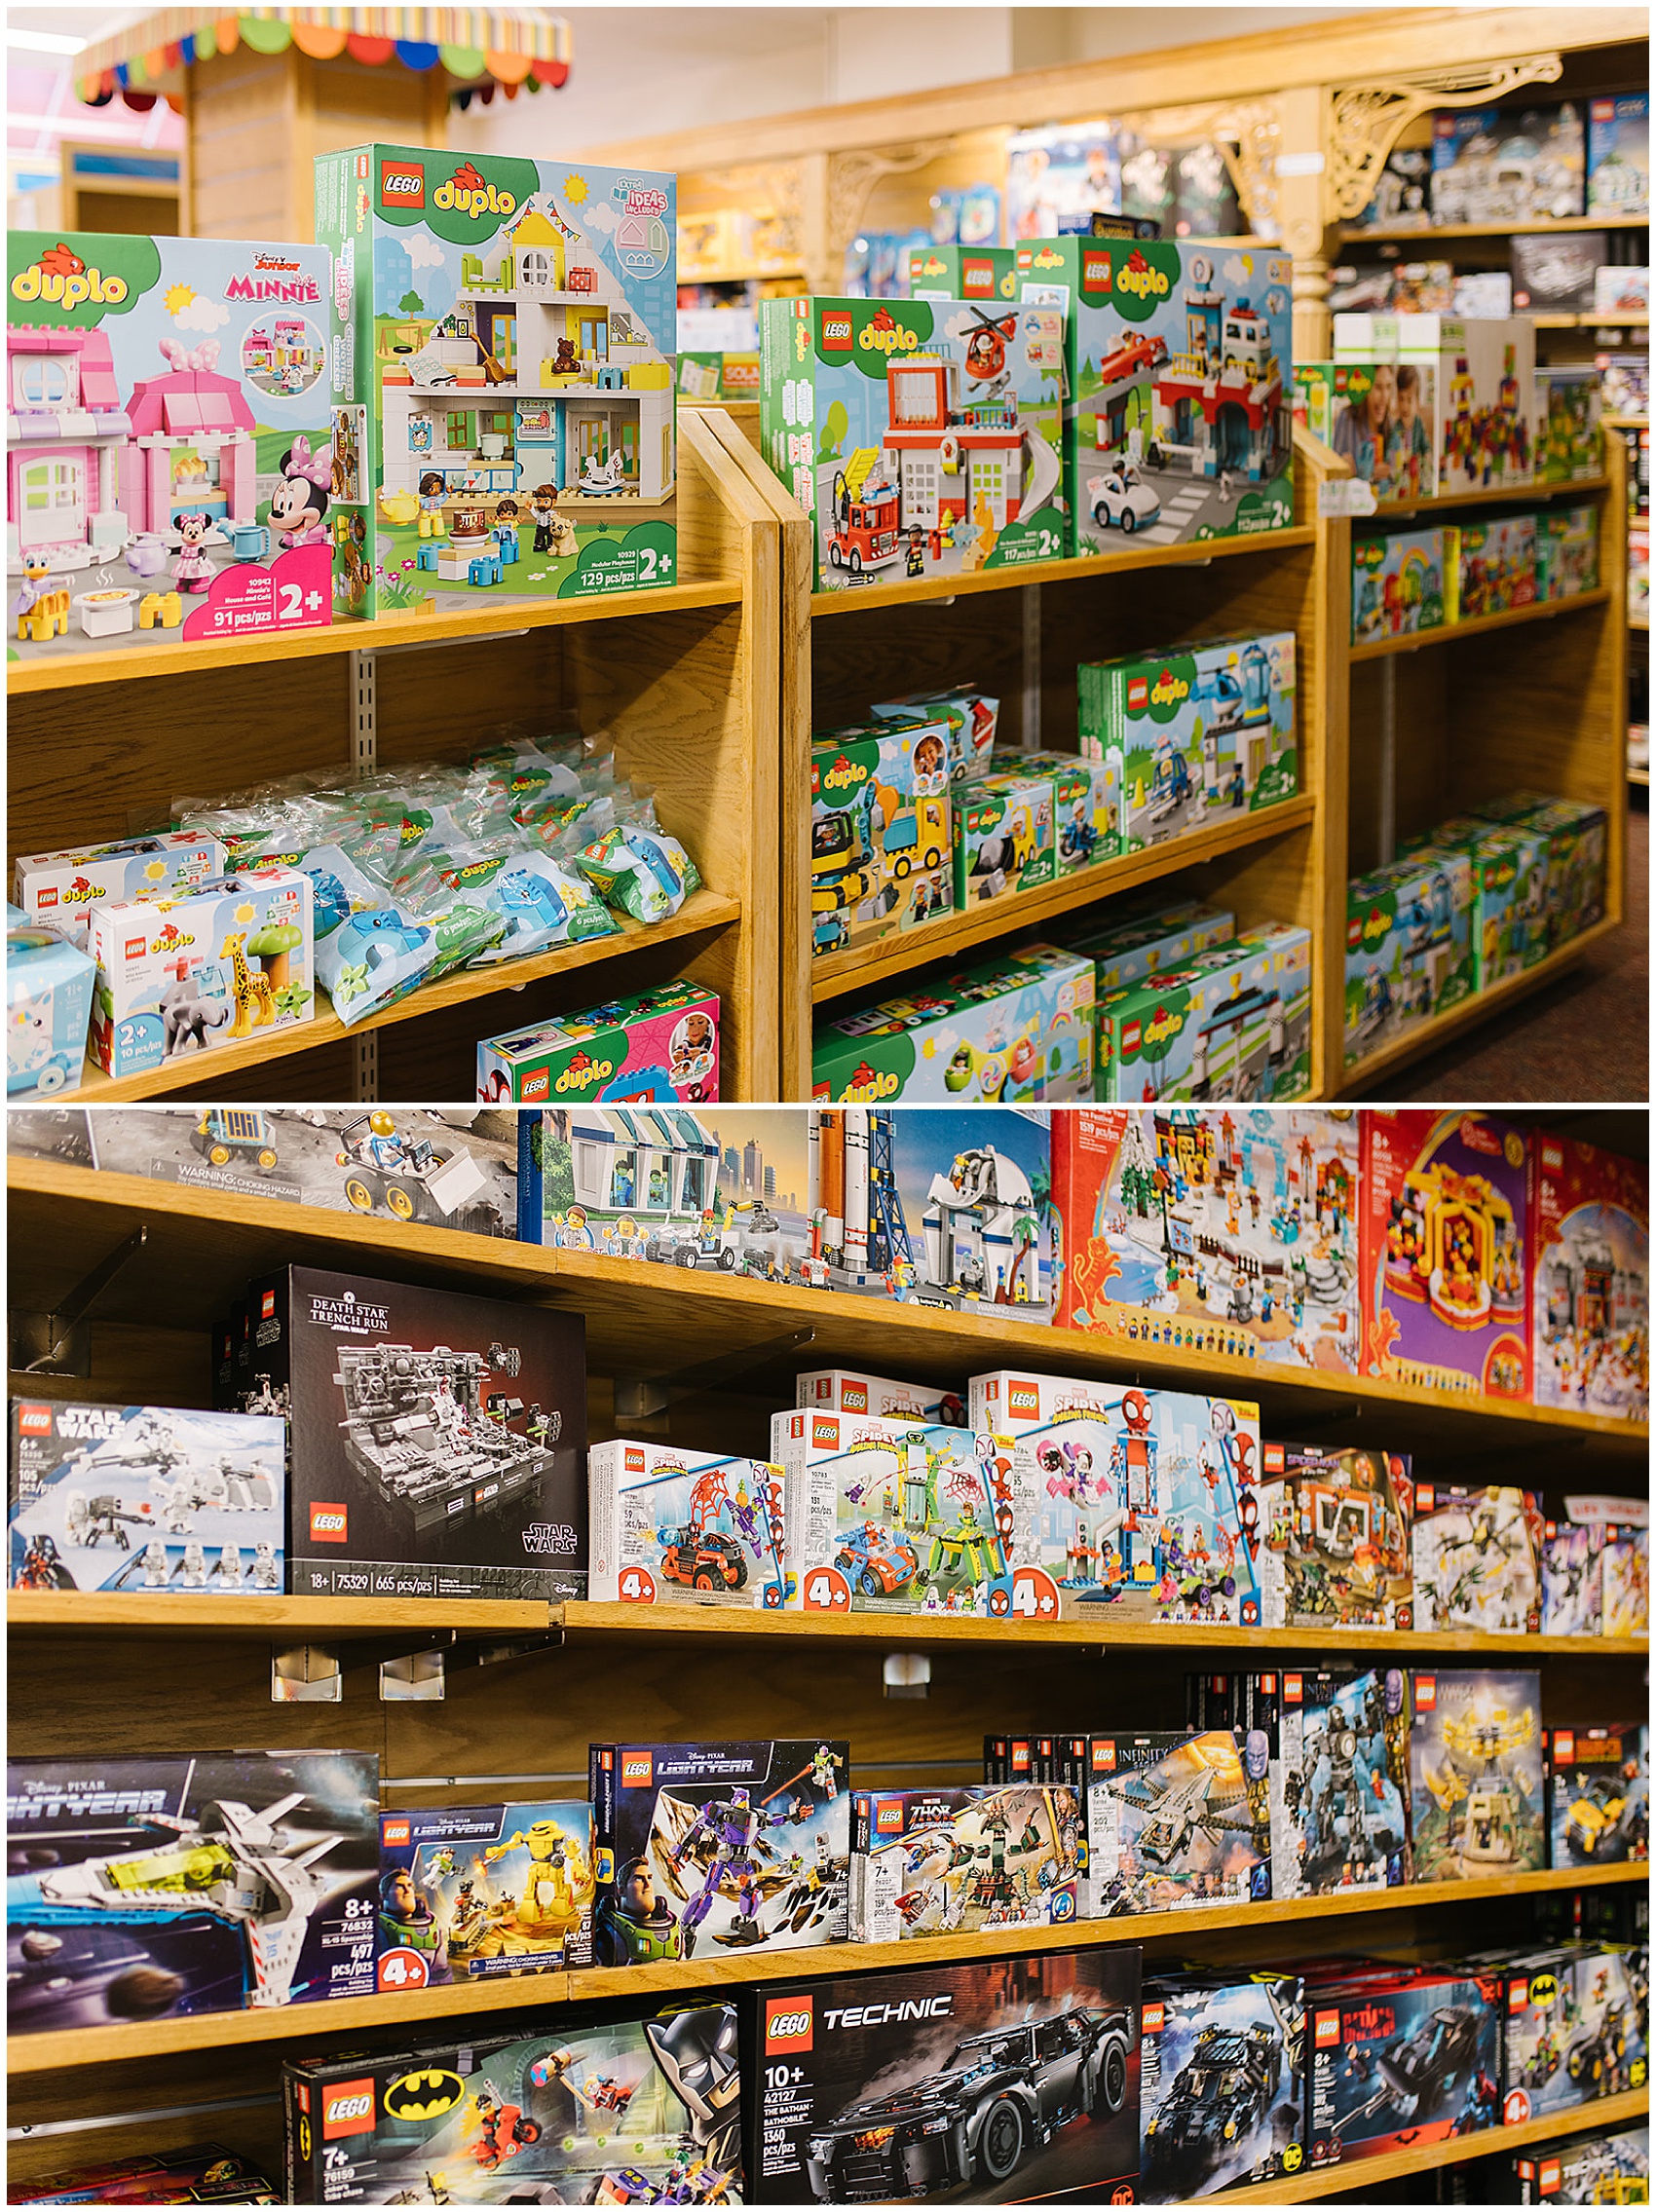 aisles of LEGO sets on display in a DC toy store